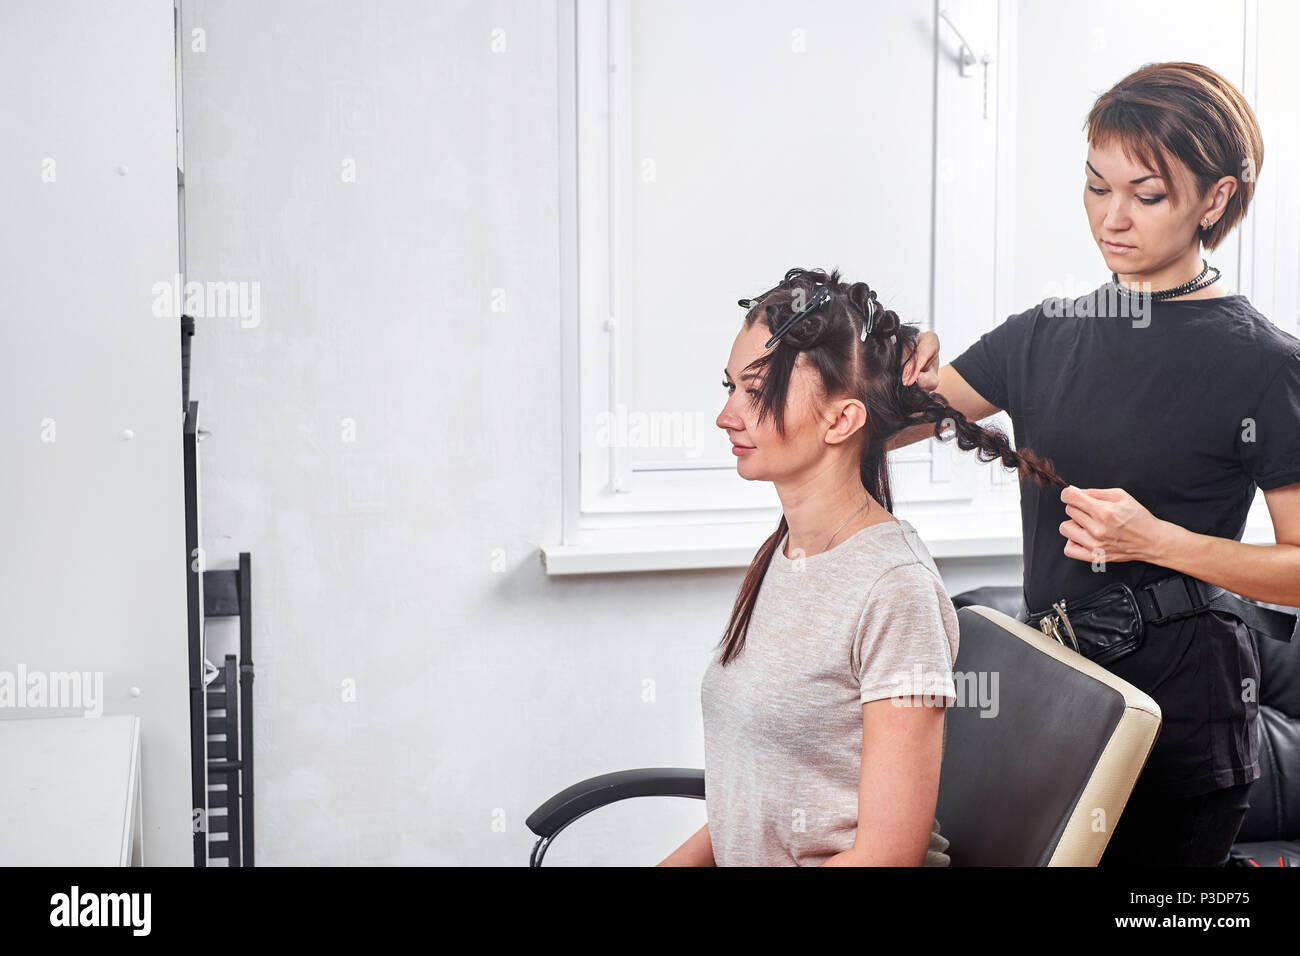 hair stylist making new haircut to brunette woman in salon Stock Photo